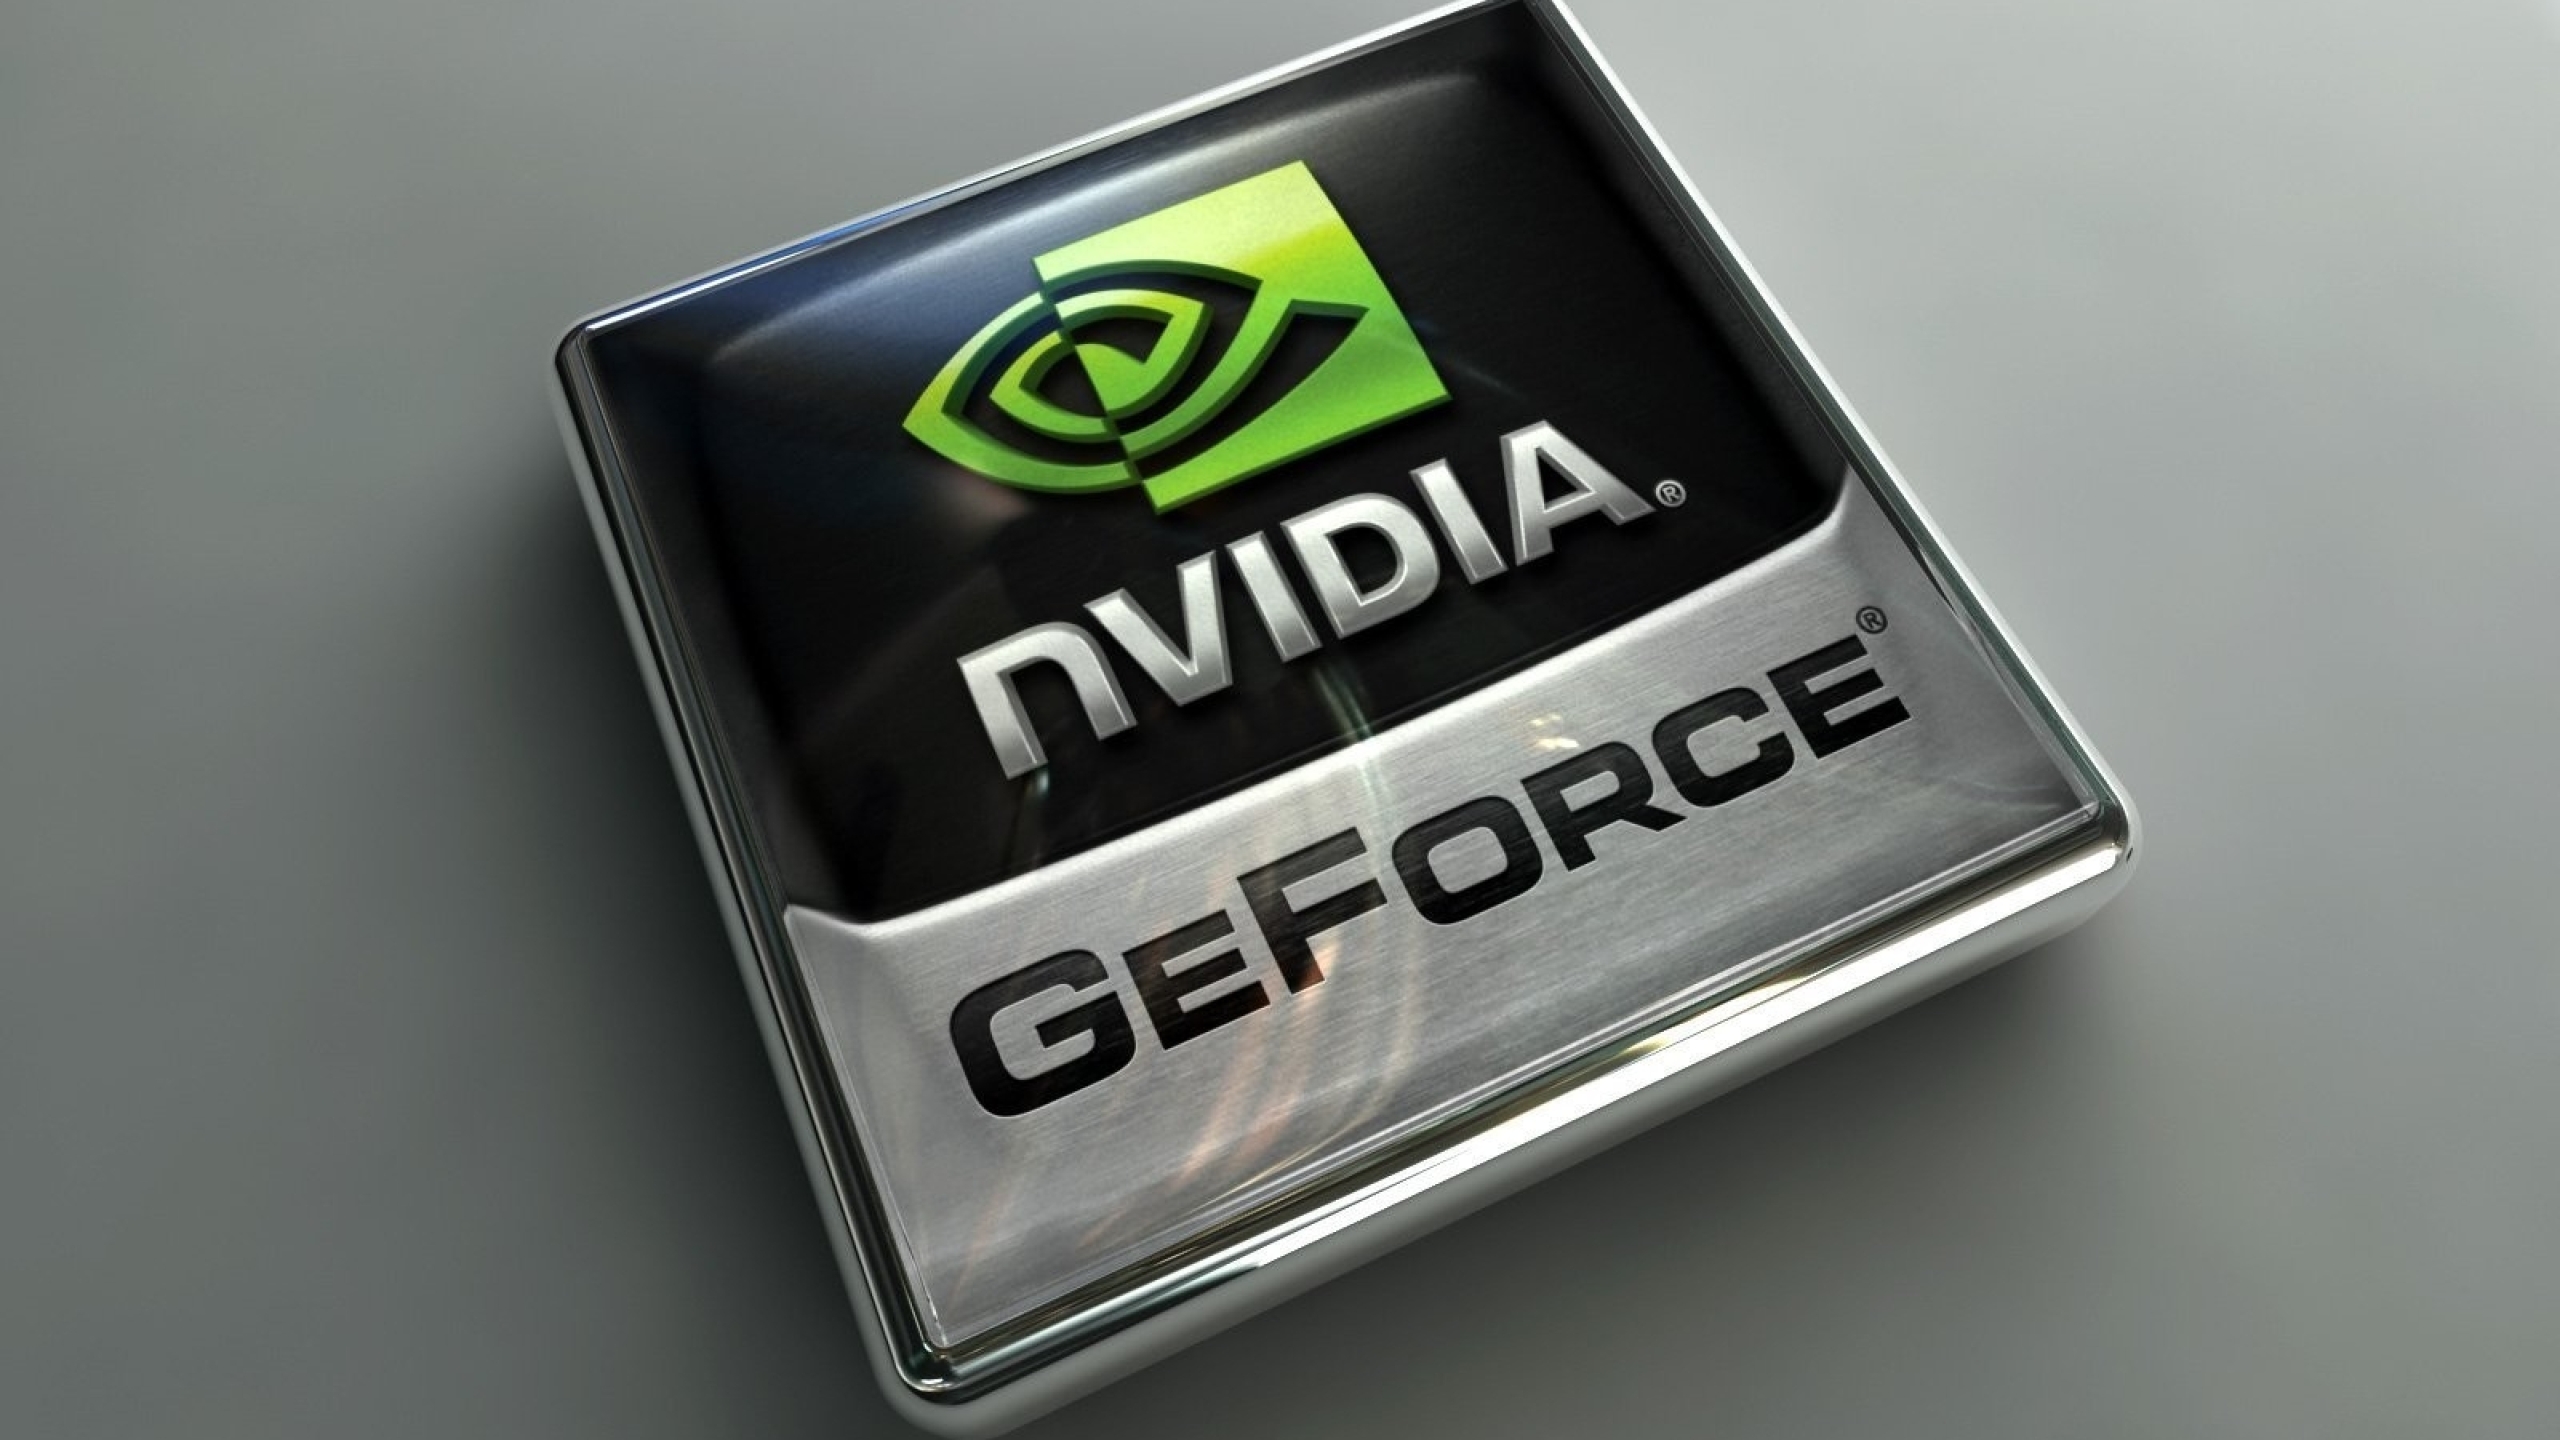 2560x1440 Nvidia Silver Black 1440p Resolution Wallpaper Hd Hi Tech 4k Wallpapers Images Photos And Background Wallpapers Den